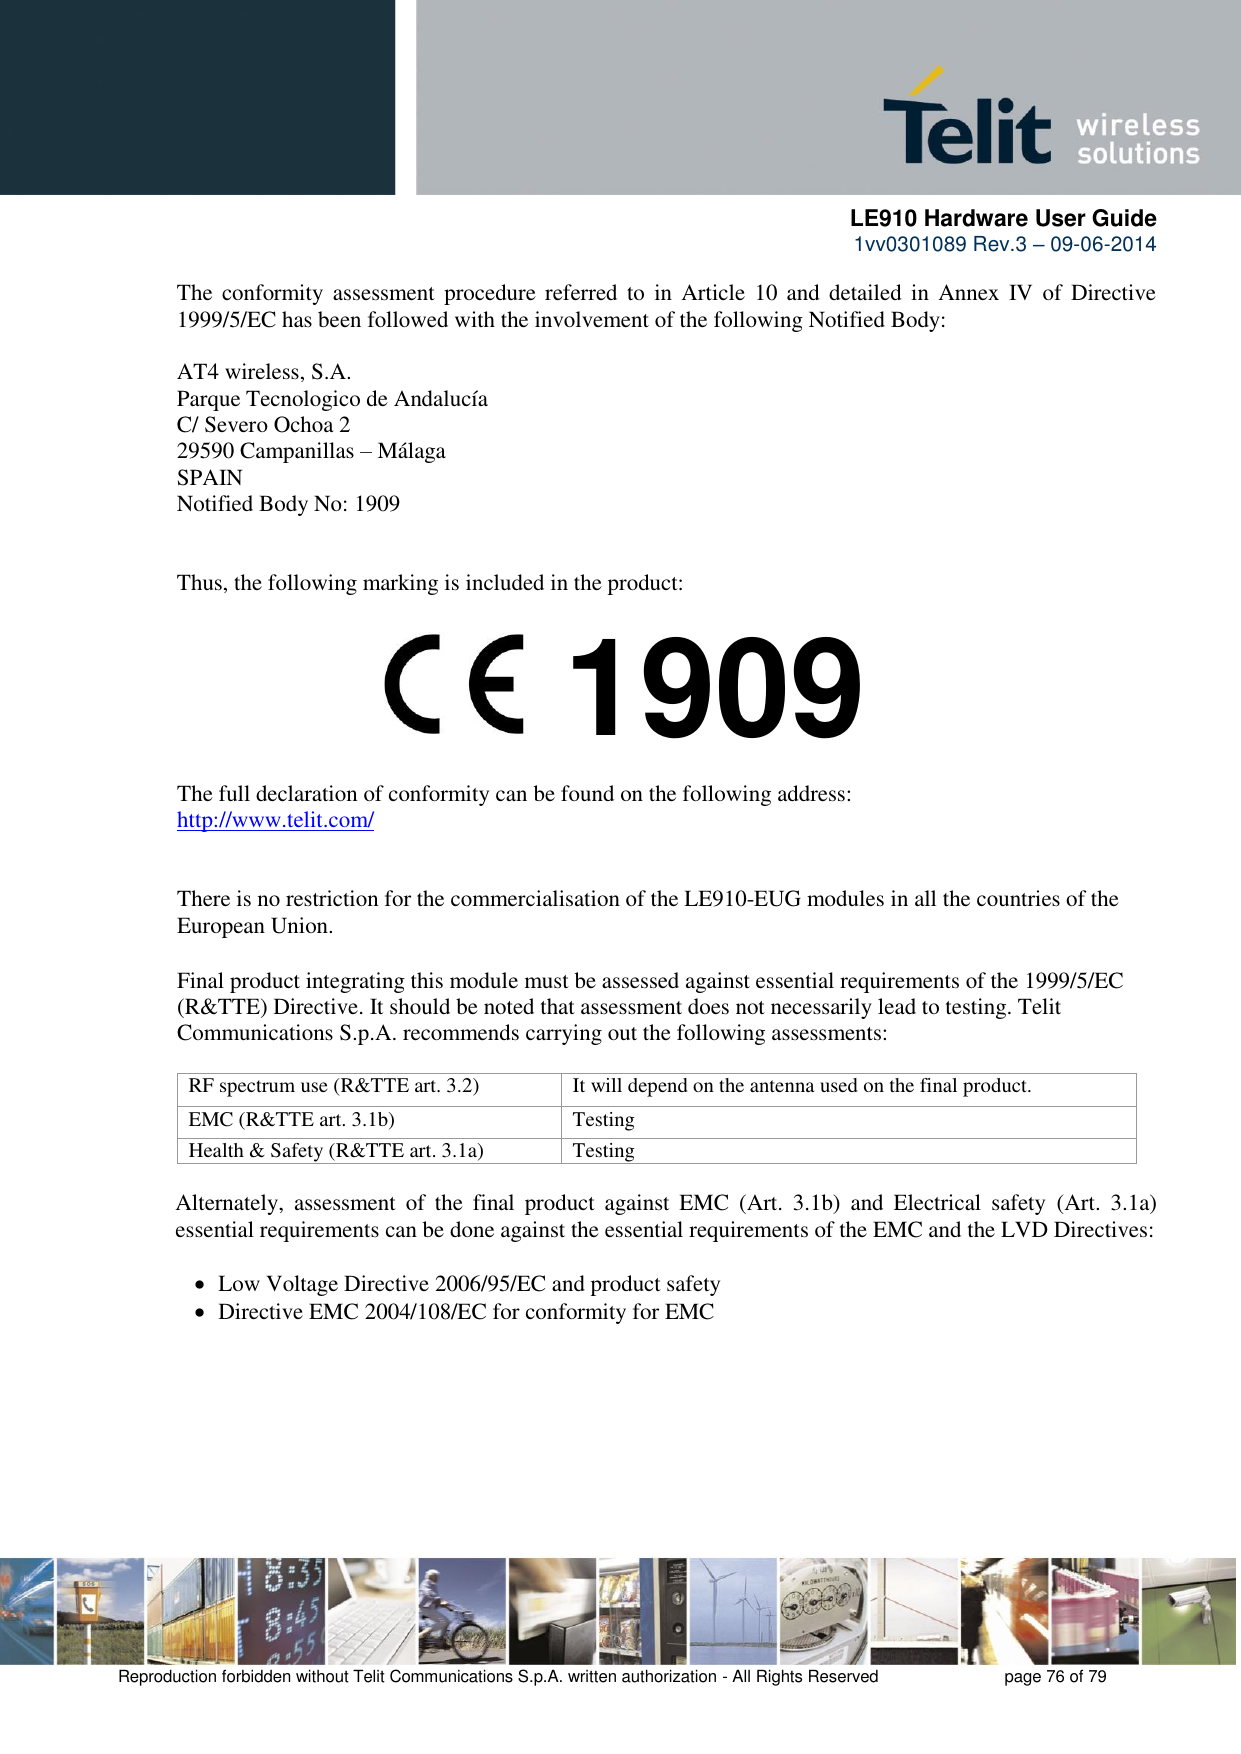      LE910 Hardware User Guide 1vv0301089 Rev.3 – 09-06-2014    Reproduction forbidden without Telit Communications S.p.A. written authorization - All Rights Reserved    page 76 of 79  The  conformity  assessment procedure  referred to  in  Article  10  and  detailed  in  Annex  IV  of  Directive 1999/5/EC has been followed with the involvement of the following Notified Body:  AT4 wireless, S.A. Parque Tecnologico de Andalucía C/ Severo Ochoa 2 29590 Campanillas – Málaga SPAIN Notified Body No: 1909   Thus, the following marking is included in the product:        The full declaration of conformity can be found on the following address: http://www.telit.com/   There is no restriction for the commercialisation of the LE910-EUG modules in all the countries of the European Union.  Final product integrating this module must be assessed against essential requirements of the 1999/5/EC (R&amp;TTE) Directive. It should be noted that assessment does not necessarily lead to testing. Telit Communications S.p.A. recommends carrying out the following assessments:  RF spectrum use (R&amp;TTE art. 3.2) It will depend on the antenna used on the final product. EMC (R&amp;TTE art. 3.1b) Testing Health &amp; Safety (R&amp;TTE art. 3.1a) Testing  Alternately,  assessment  of  the  final  product  against  EMC  (Art.  3.1b)  and  Electrical  safety  (Art.  3.1a) essential requirements can be done against the essential requirements of the EMC and the LVD Directives:     Low Voltage Directive 2006/95/EC and product safety    Directive EMC 2004/108/EC for conformity for EMC 1909 